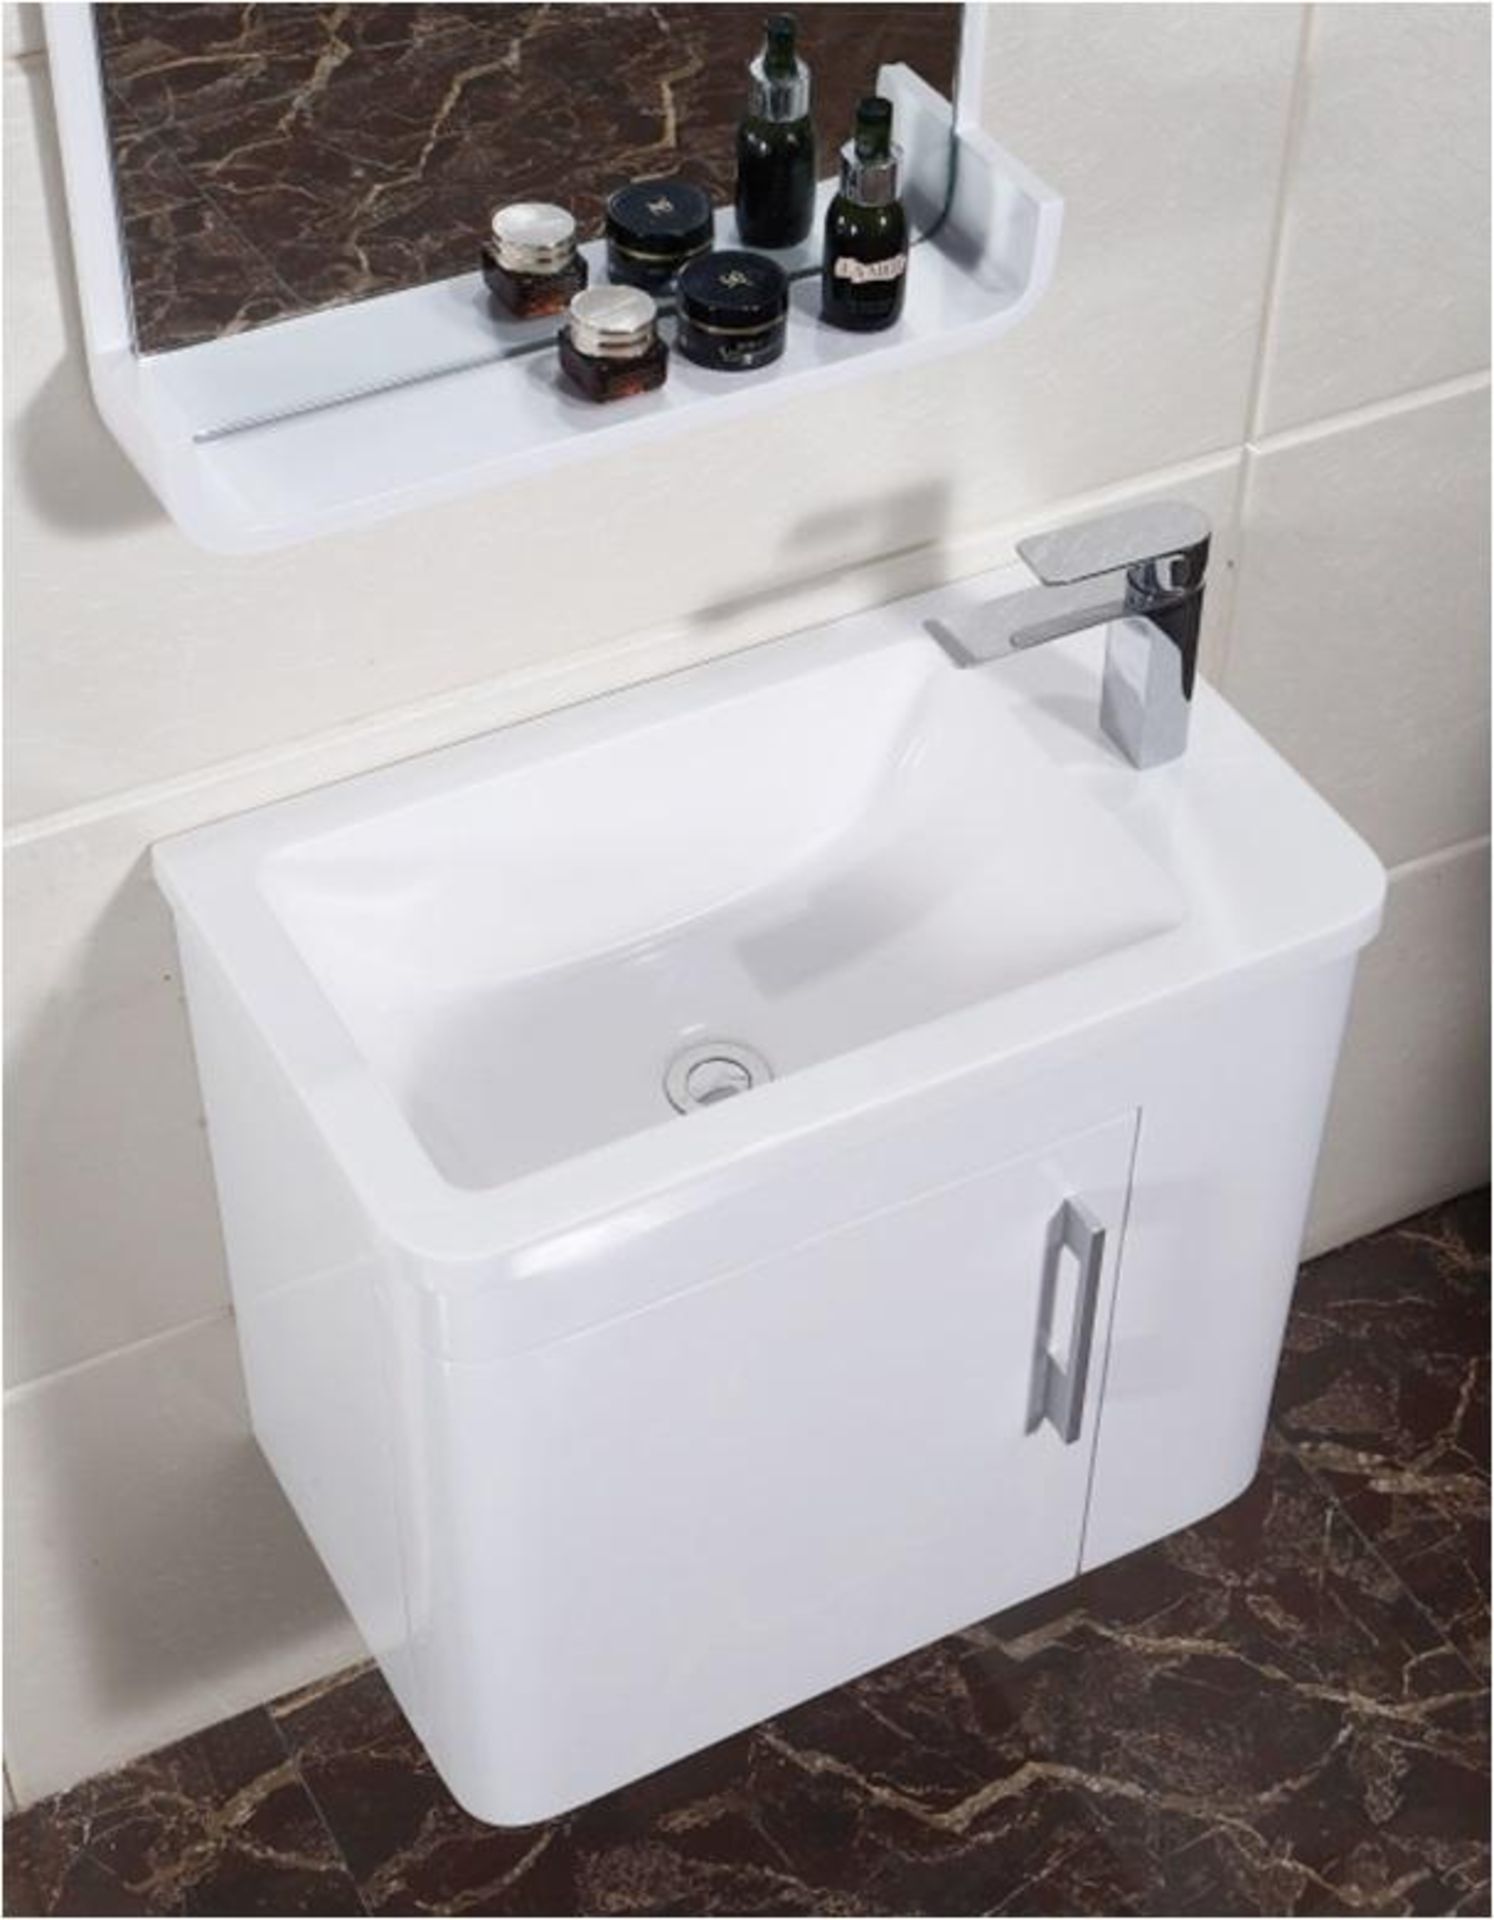 1 x Wall Hung Bathroom Vanity Unit Featuring A Gelcoat Coated Basin And Soft Close Drawers - Image 2 of 2